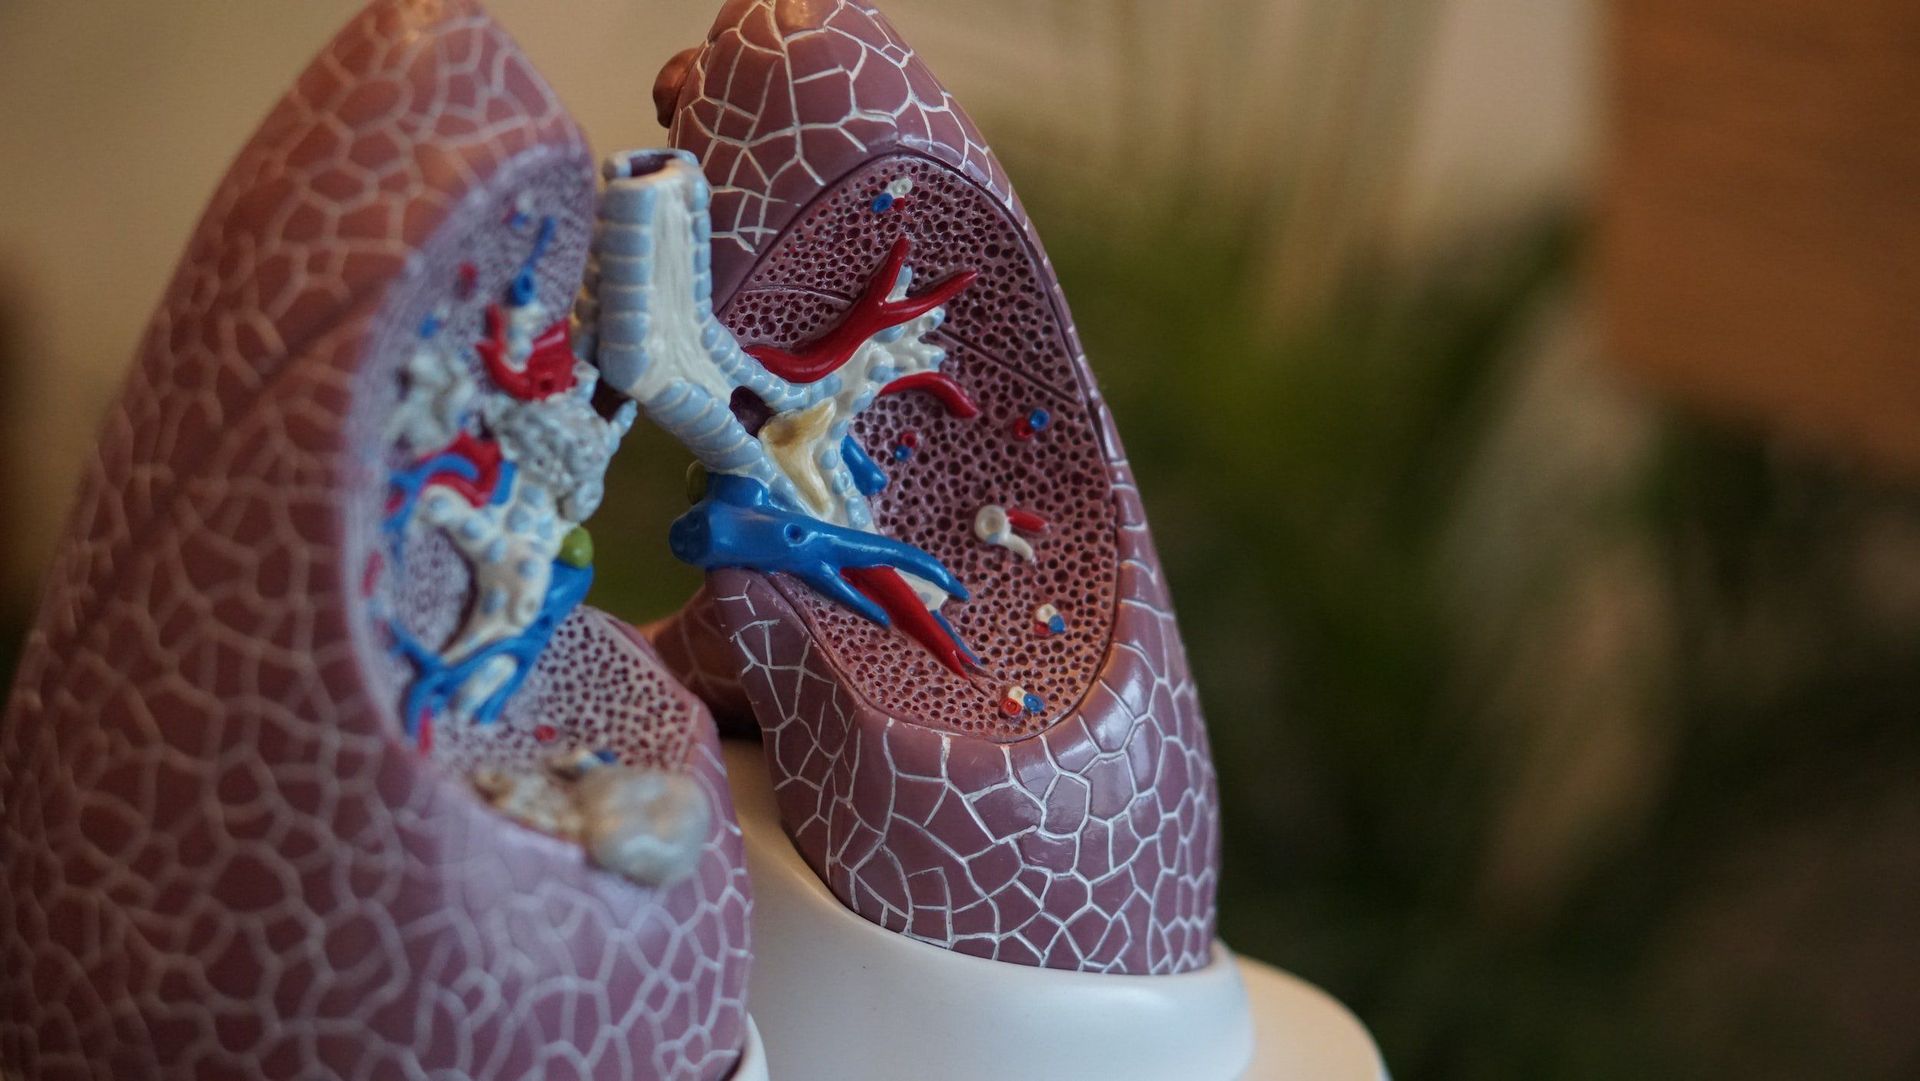 A close up of a model of a person 's lungs.